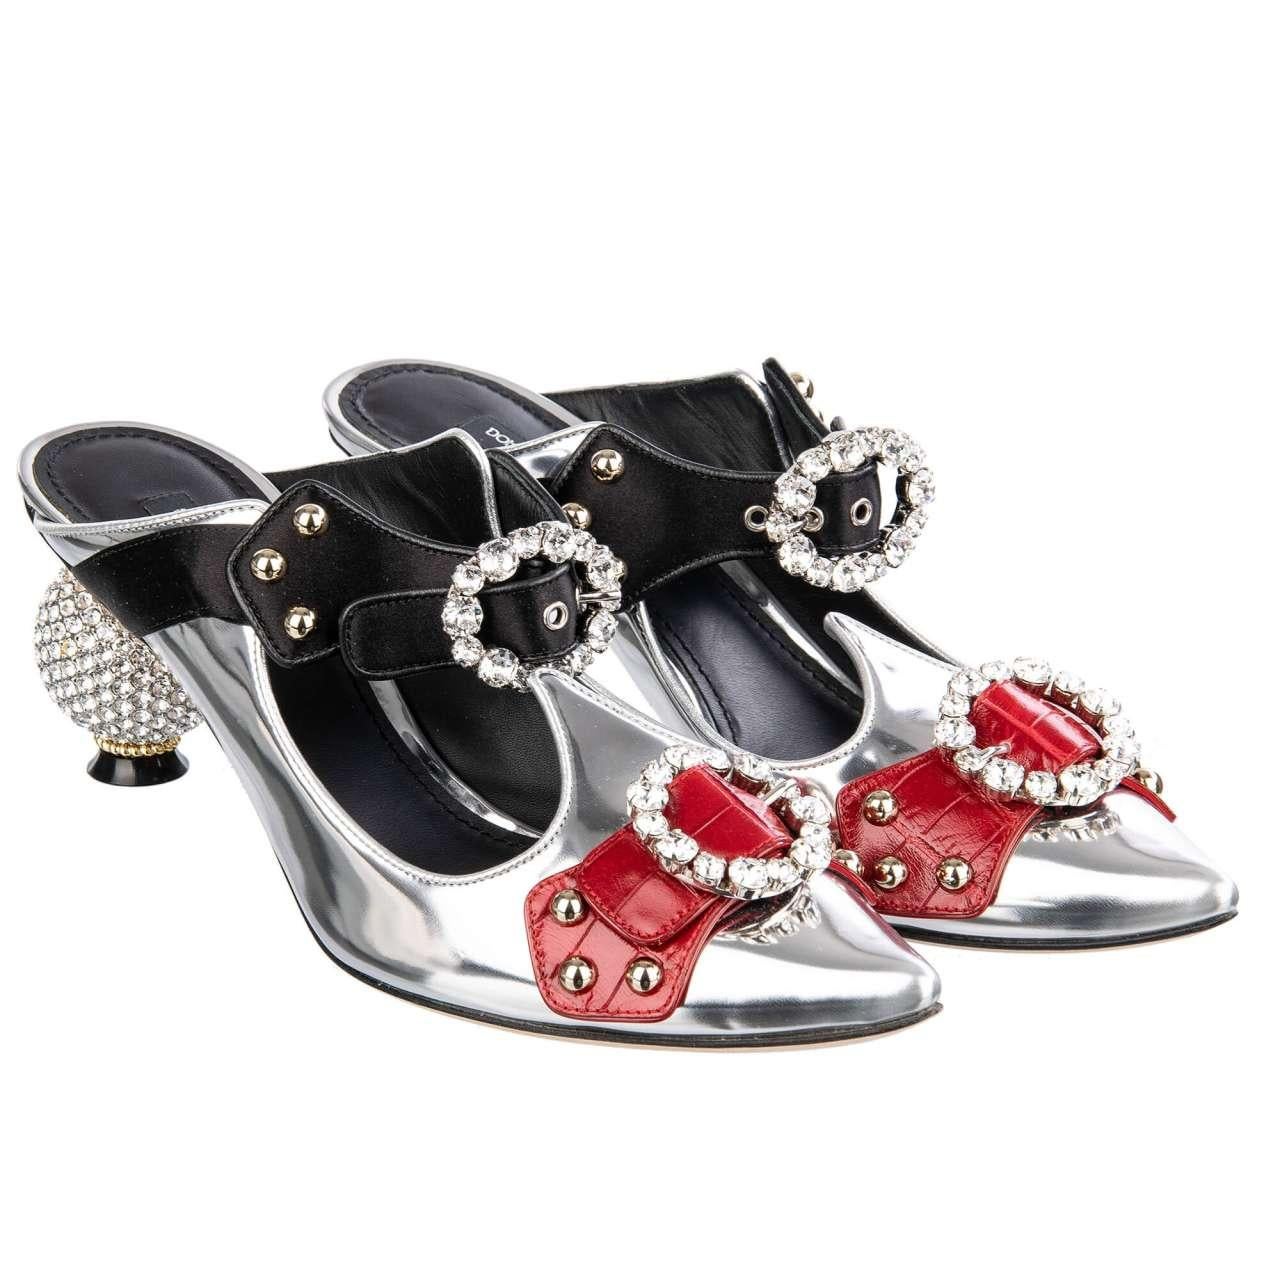 - Pointed metallic leather Mule Pumps ALADINO in silver with two crystals embellished buckles and crytals ball heel by DOLCE & GABBANA - New with Box - MADE IN ITALY - Former RRP: EUR 1.750 - Crystals embellished buckles and crystal ball heel -